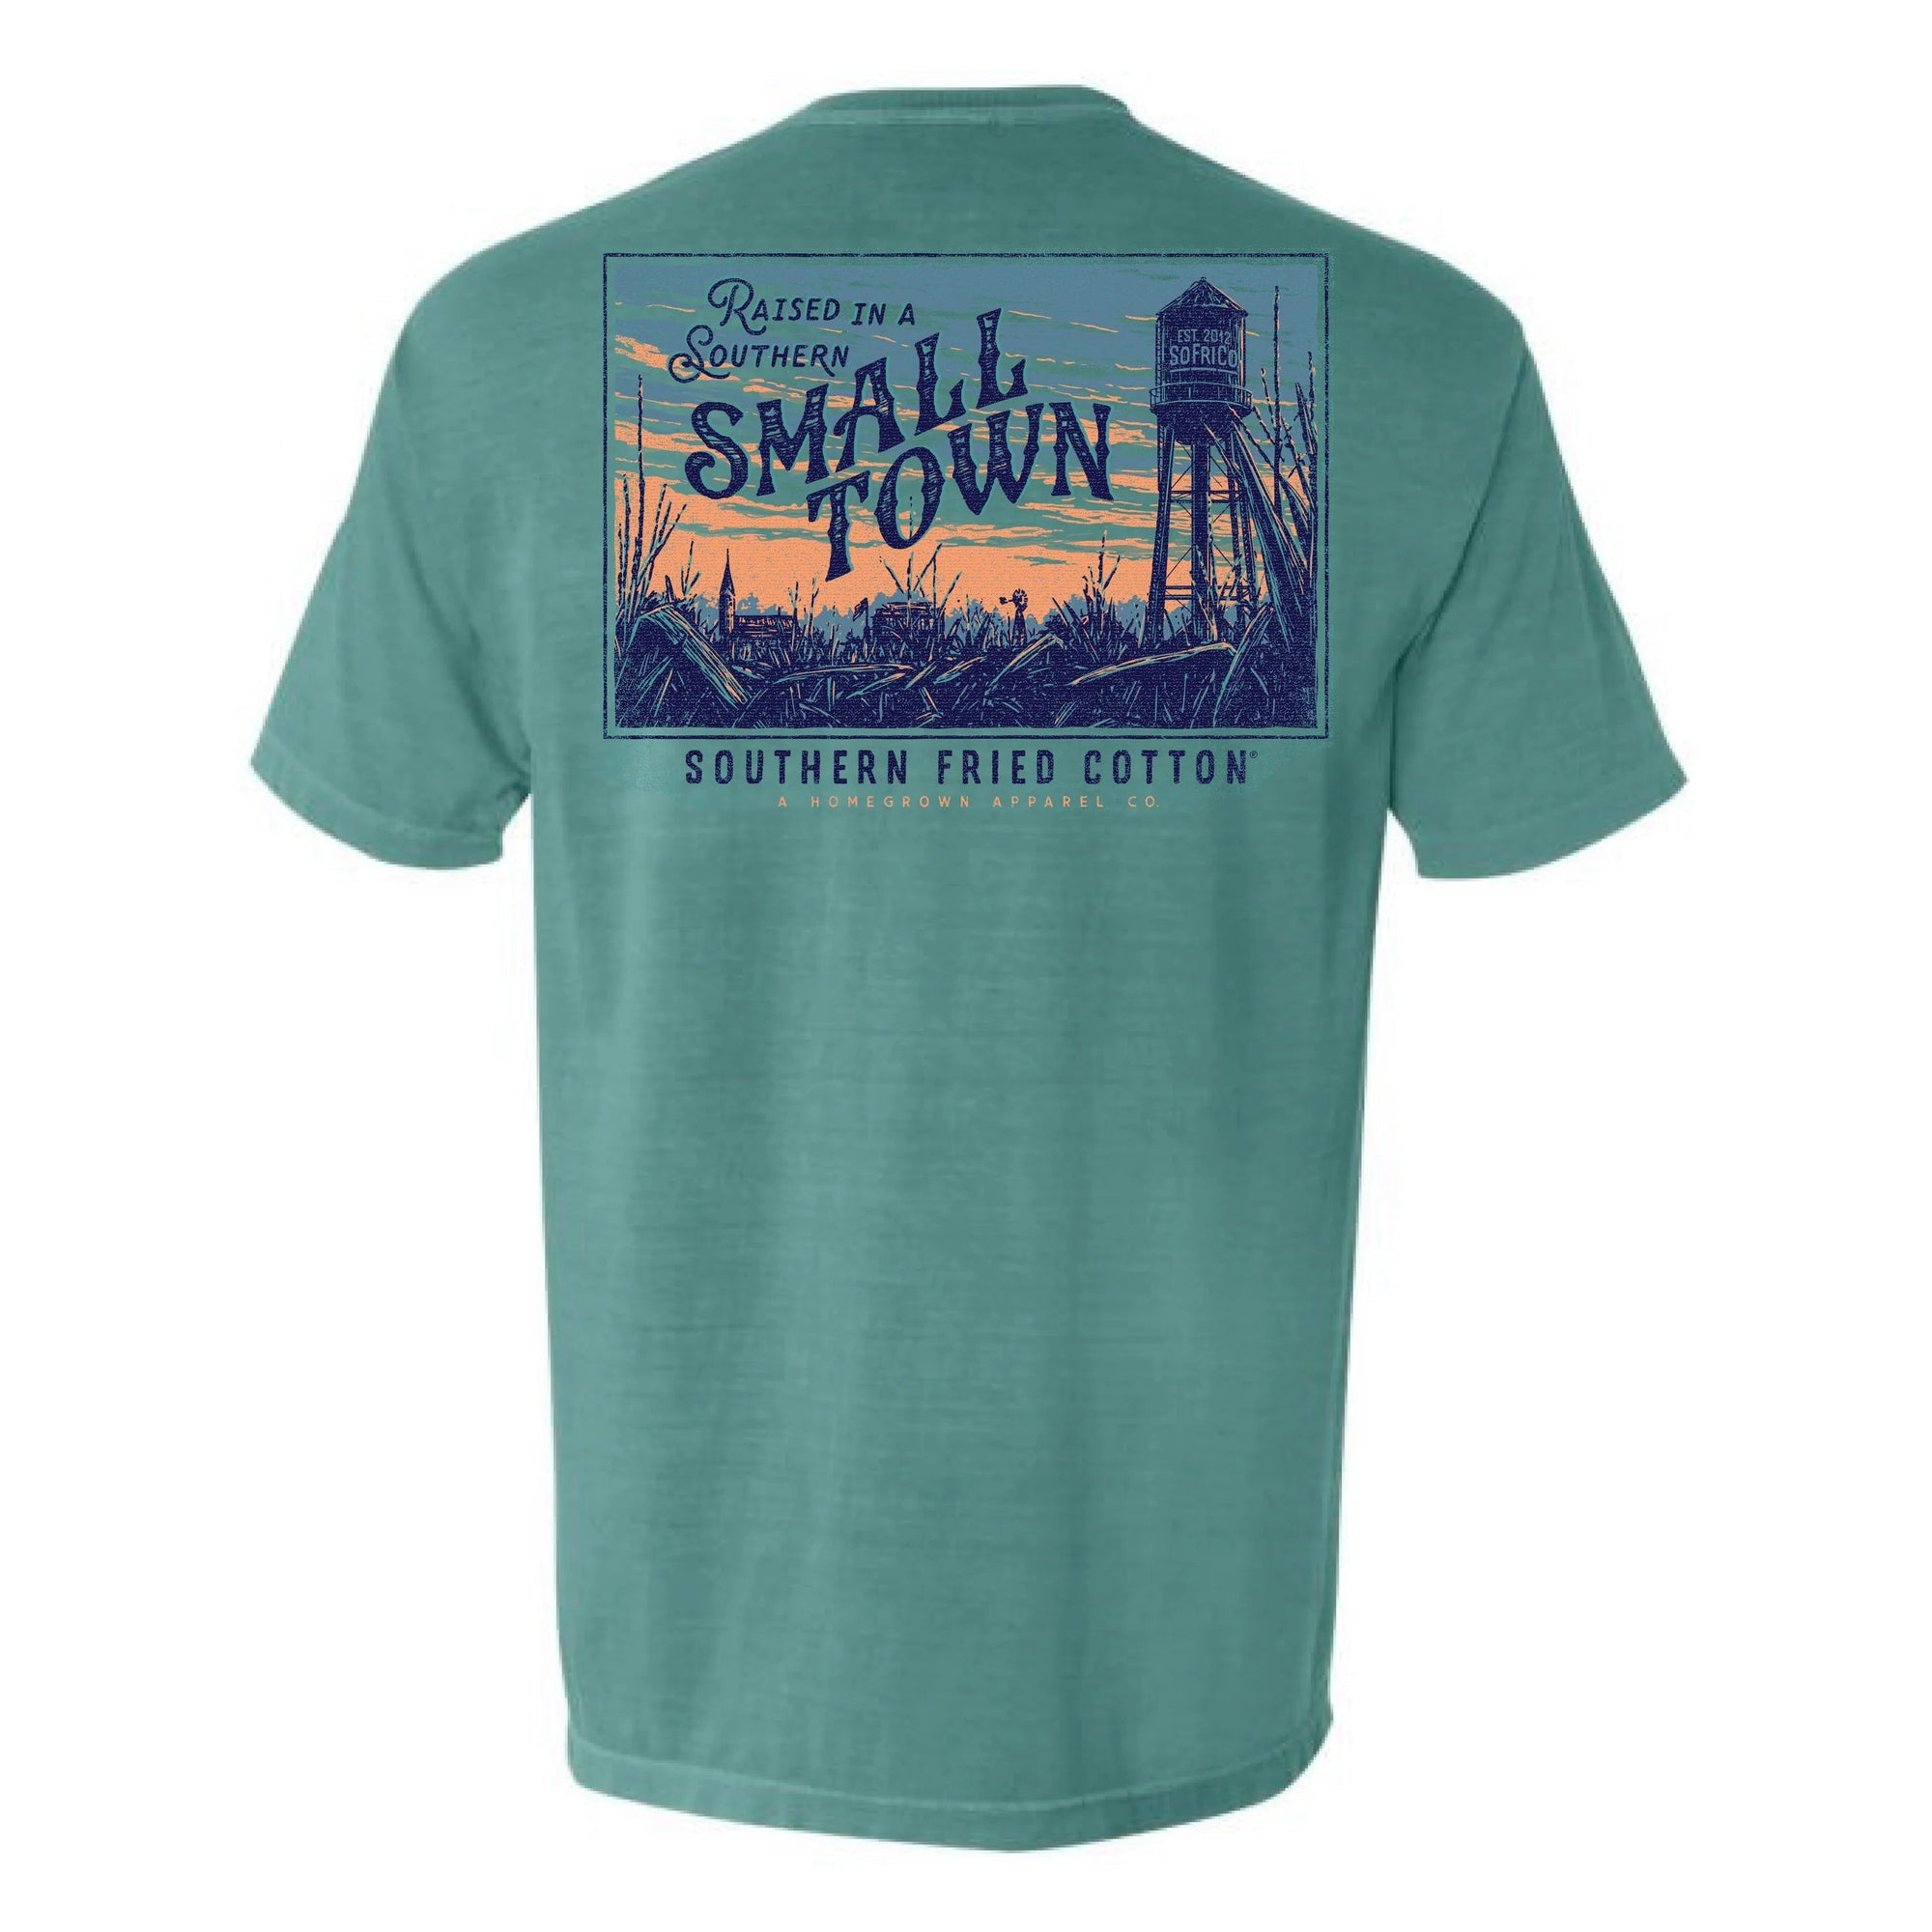 SOUTHERN FRIED COTTON Men's Tees Southern Fried Cotton Raised in a Small Town Tee || David's Clothing